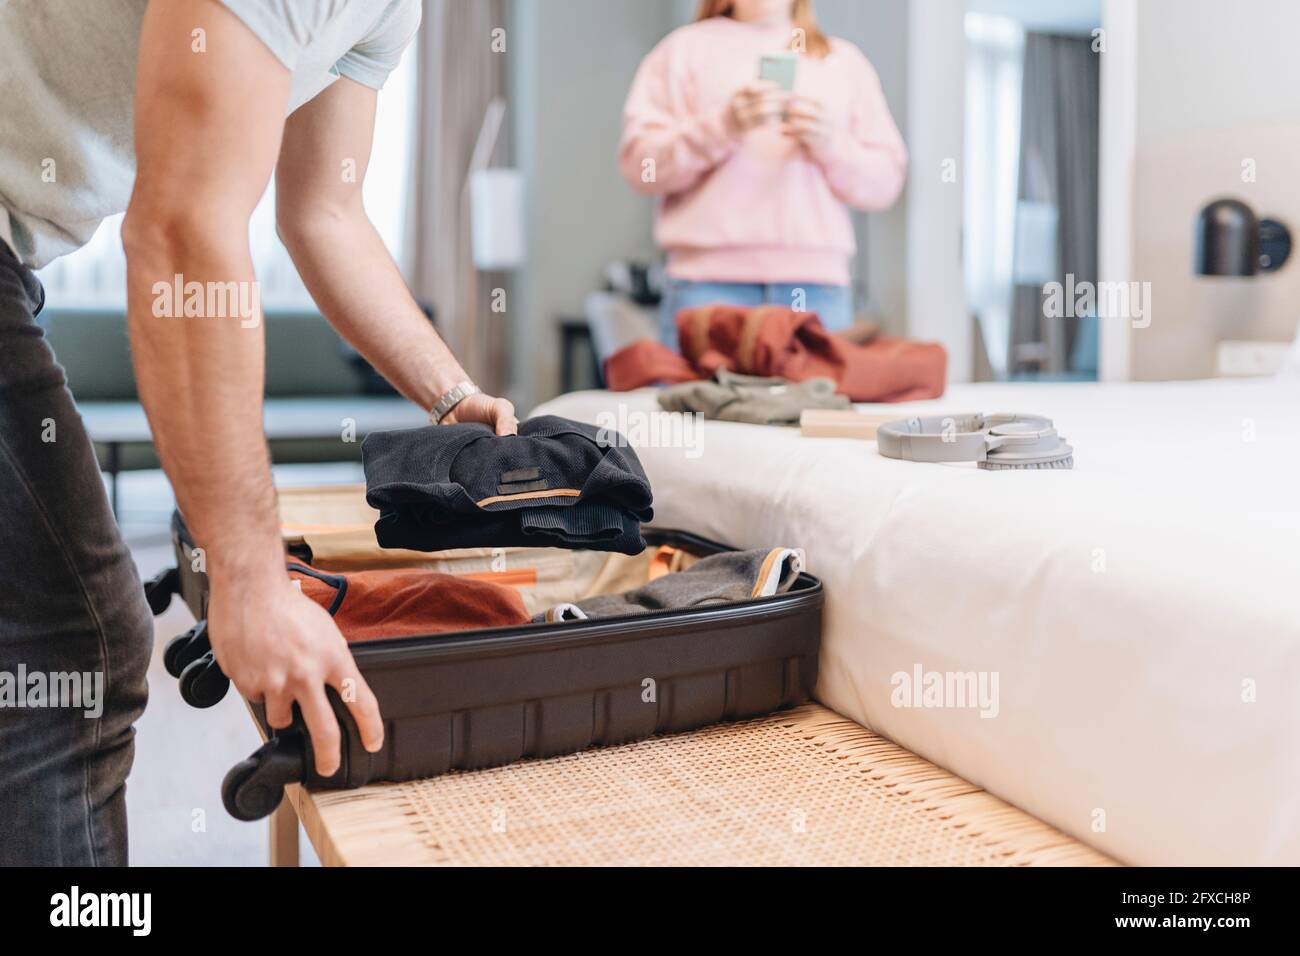 Man removing clothes from suitcase with woman in background at hotel Stock Photo